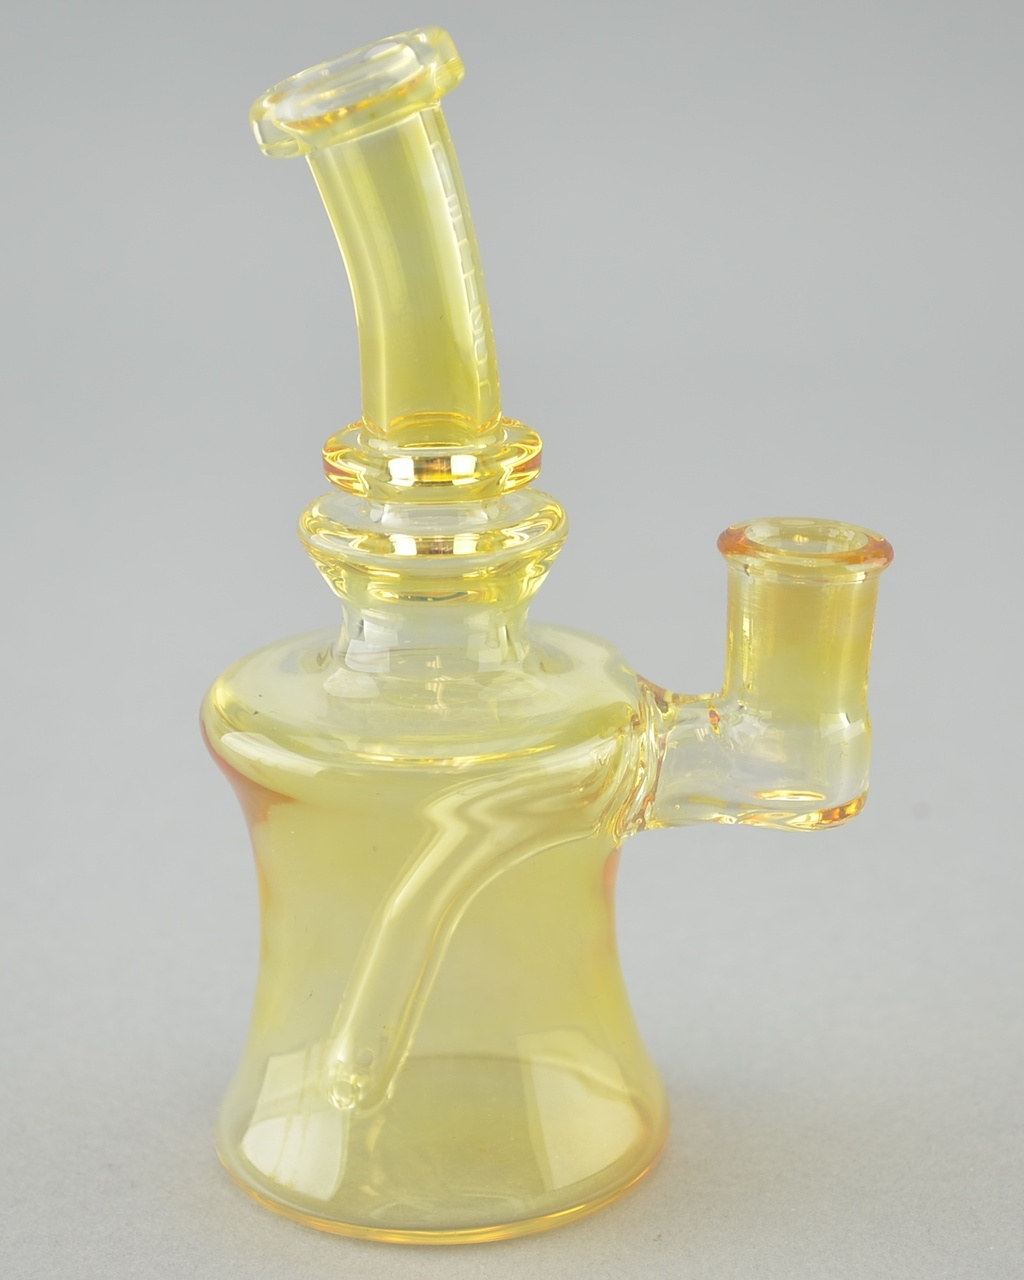 HIGH TECH - Fume Micro Banger Hanger Rig w/ 10mm Female Joint - The Dab Lab